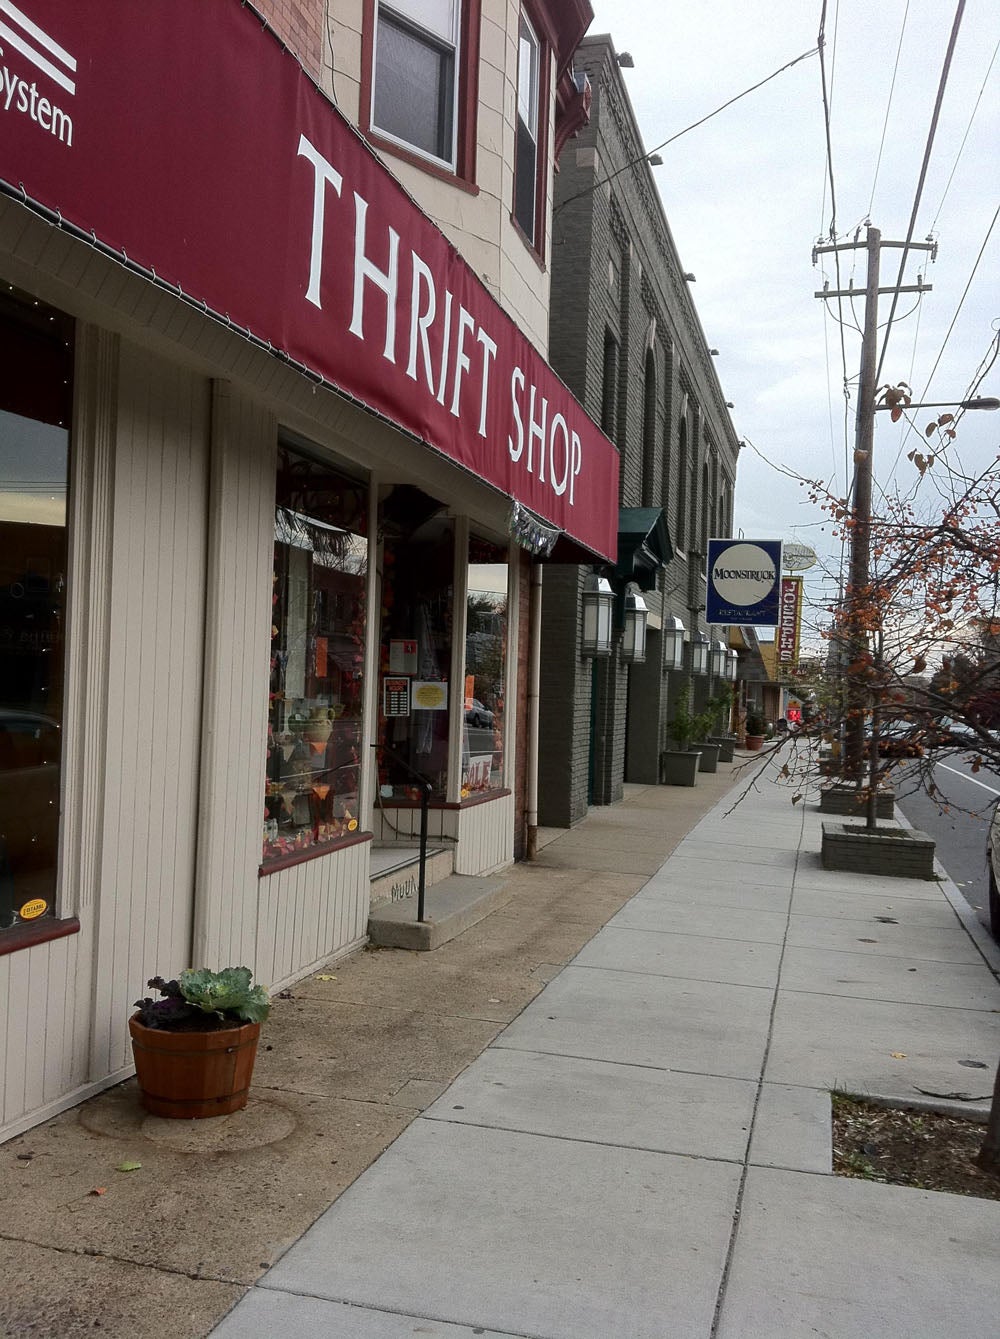 Transit-oriented development grows in Fox Chase, but doubts exist in business community